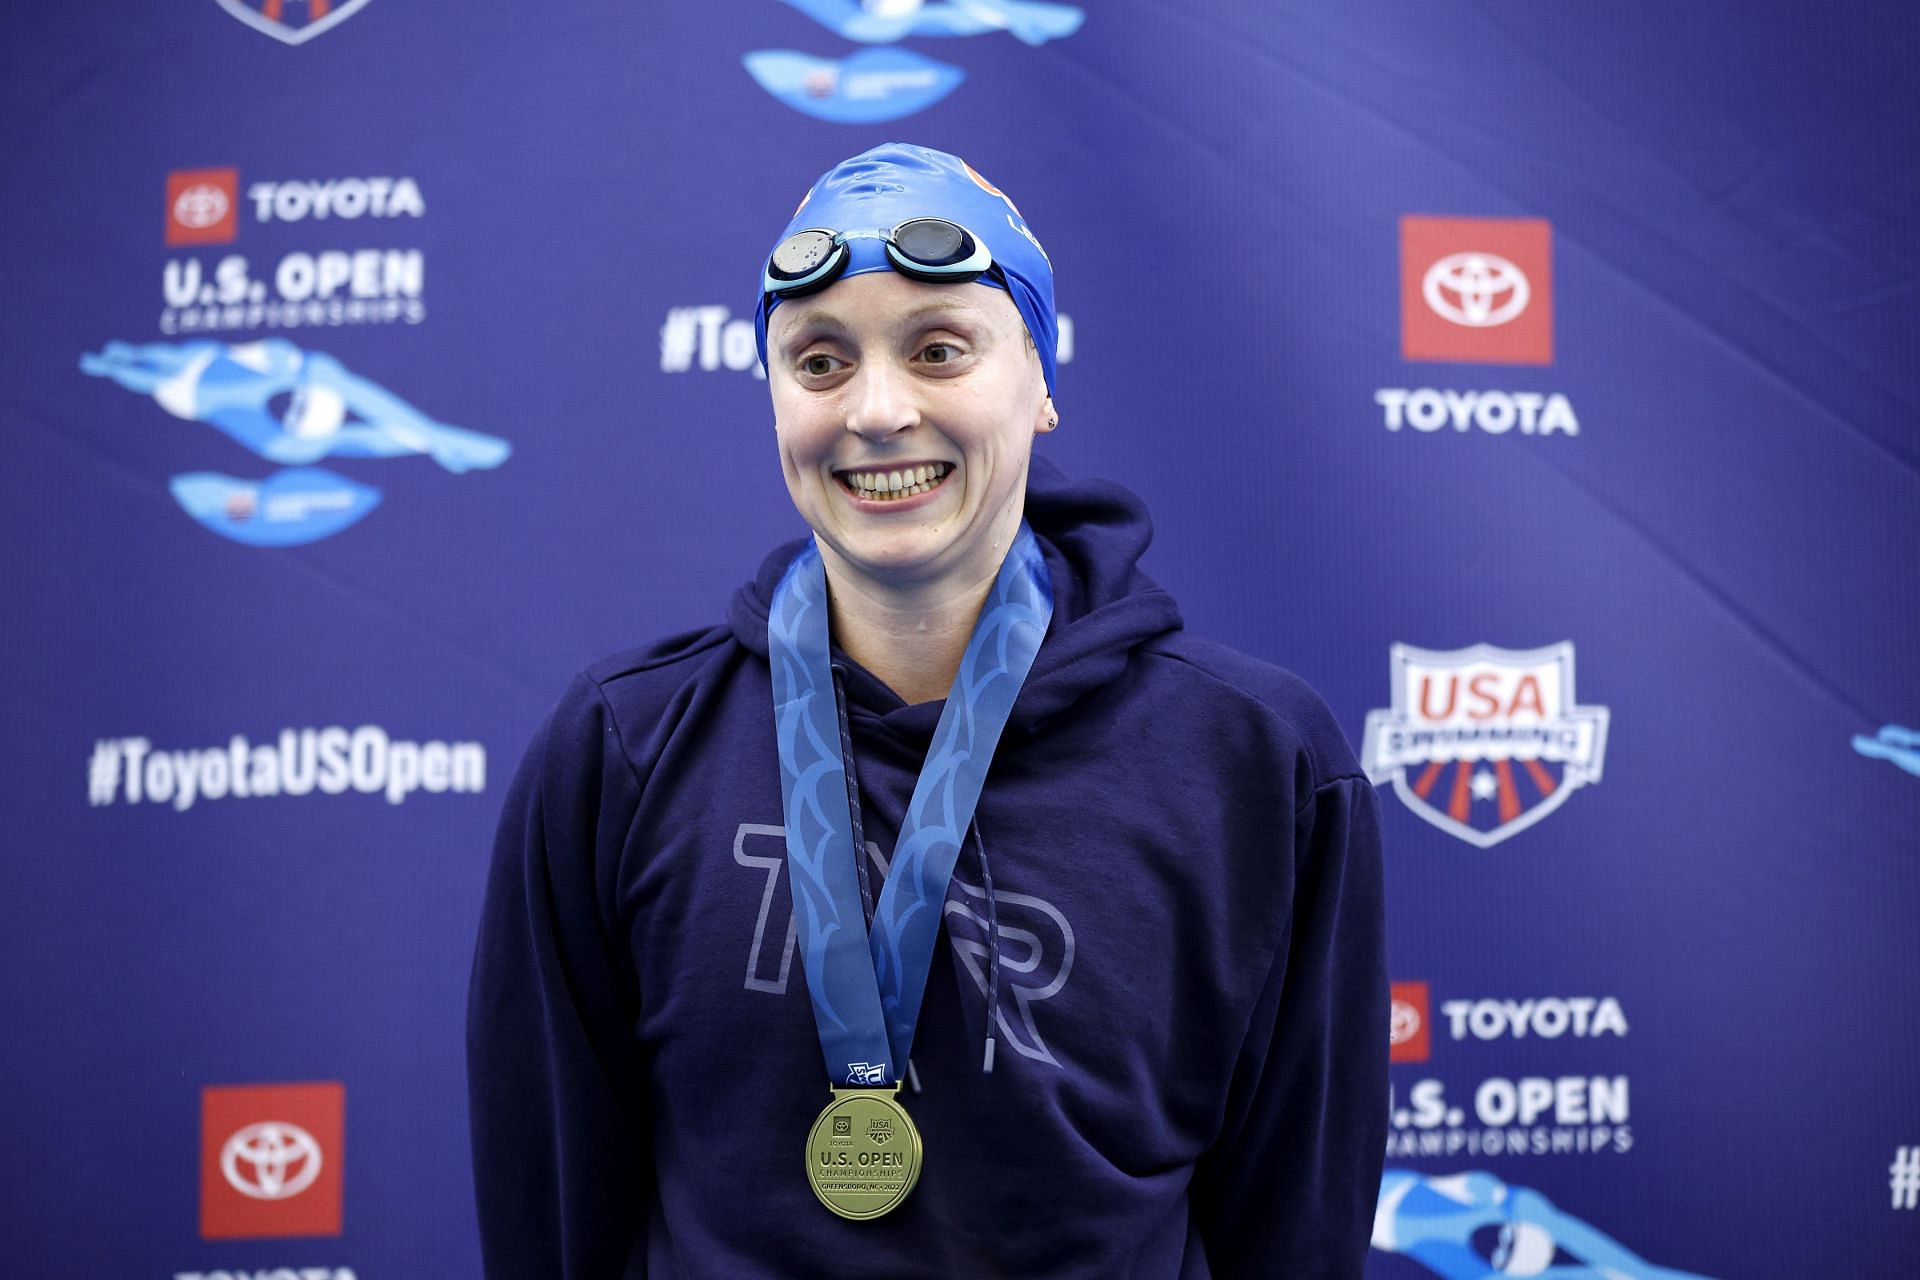 Ledecky at the Toyota U.S. Open, 2022 (Photo by Jared C. Tilton/Getty Images)